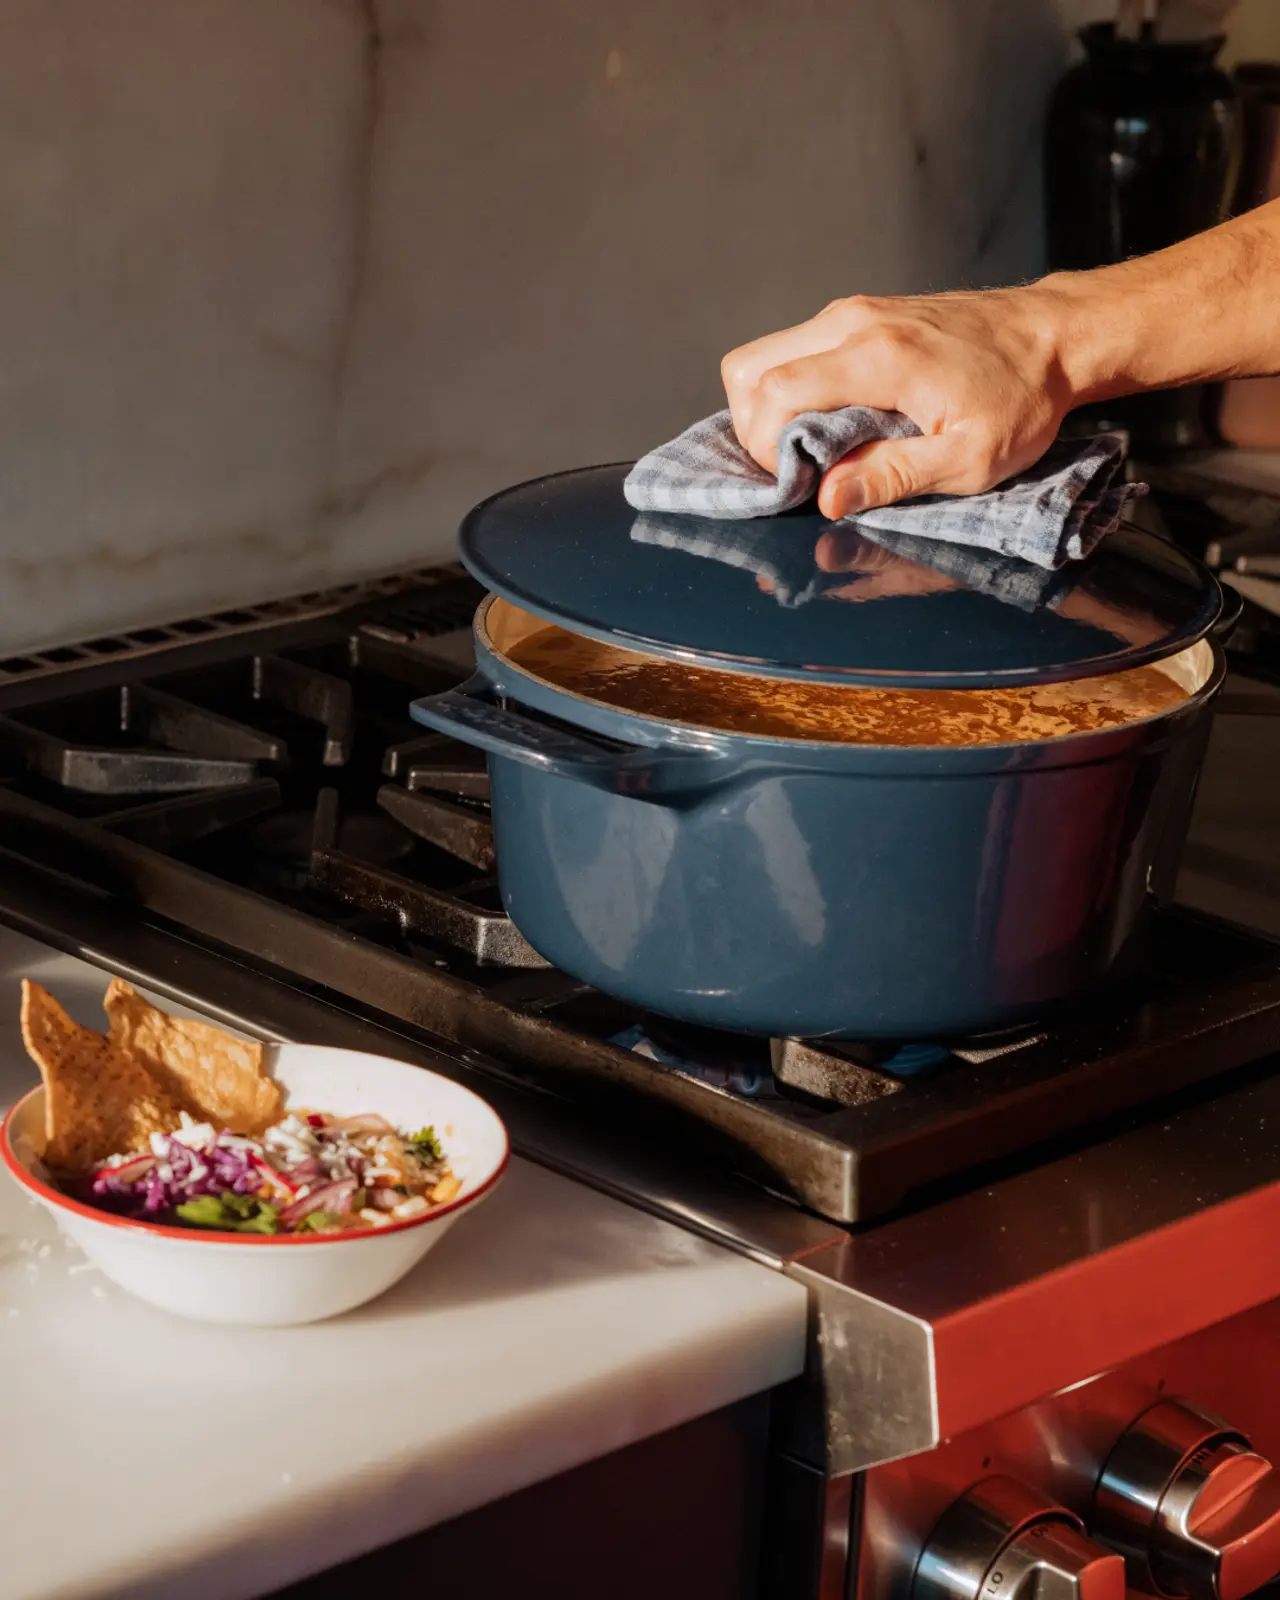 A person is lifting the lid of a large blue pot on a stove with a bowl of food garnished with onion and herbs and a tortilla chip in the foreground.